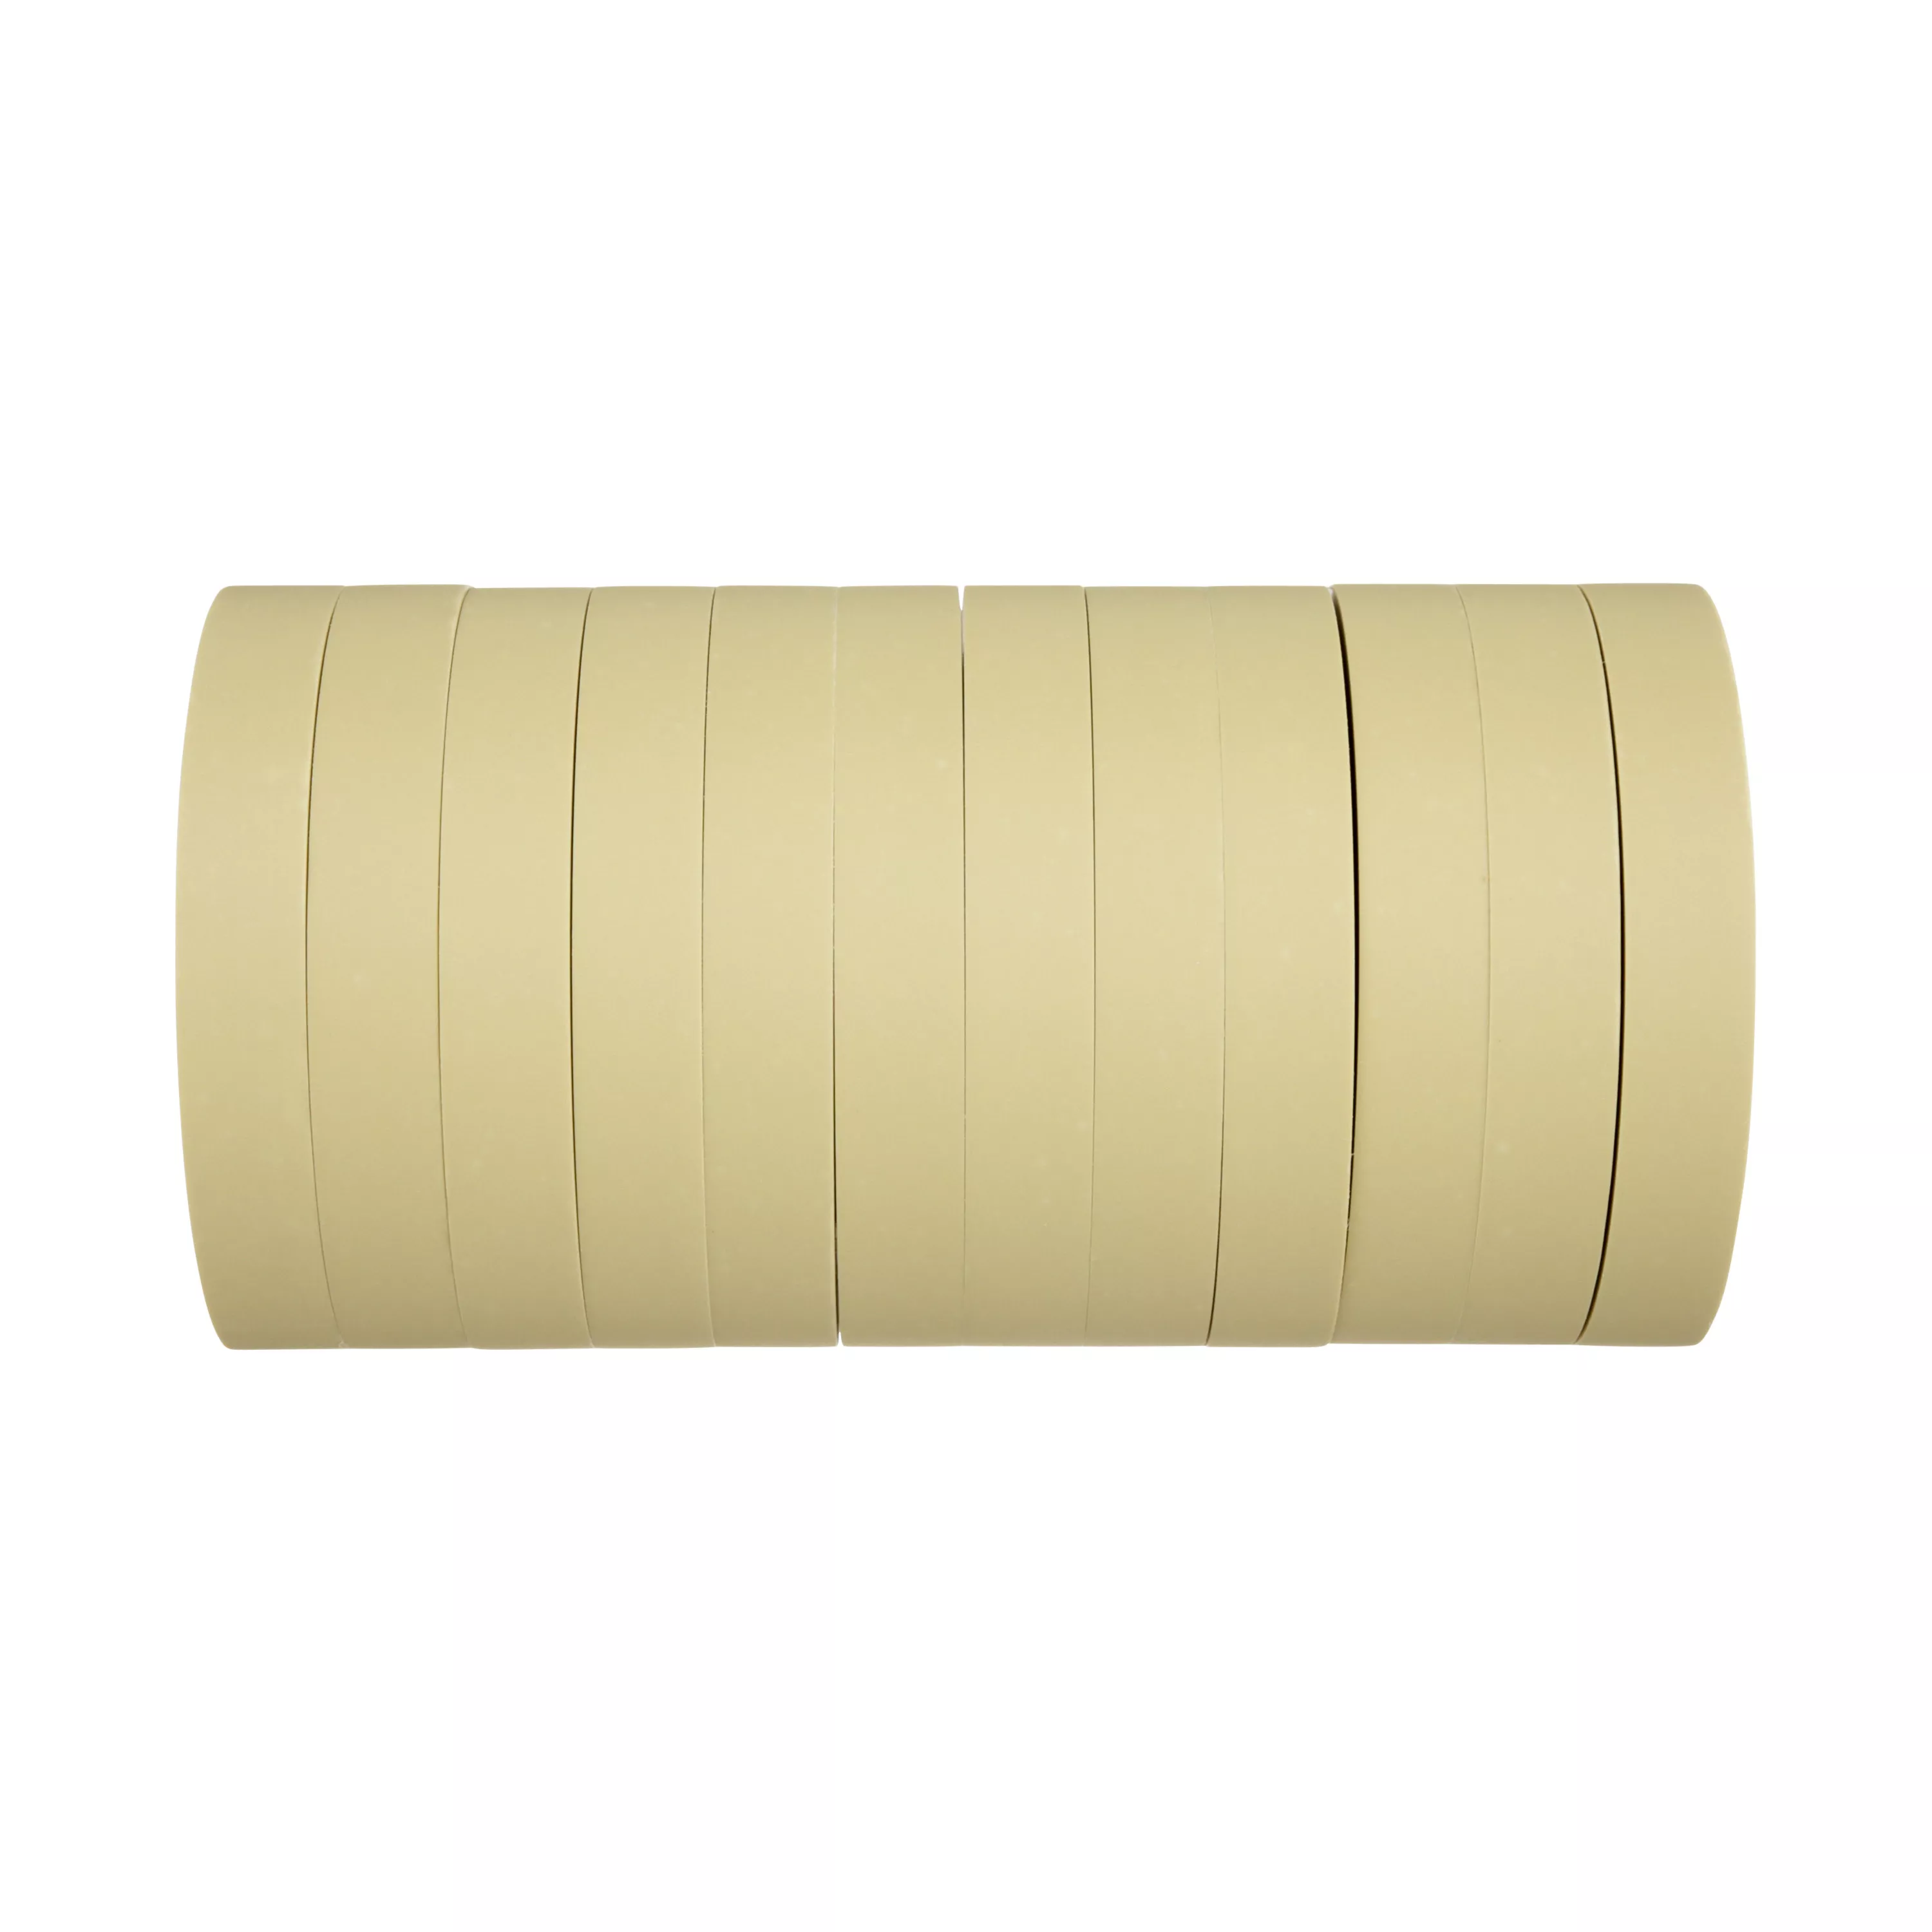 Product Number 218 | Scotch® Fine Line Tape 218